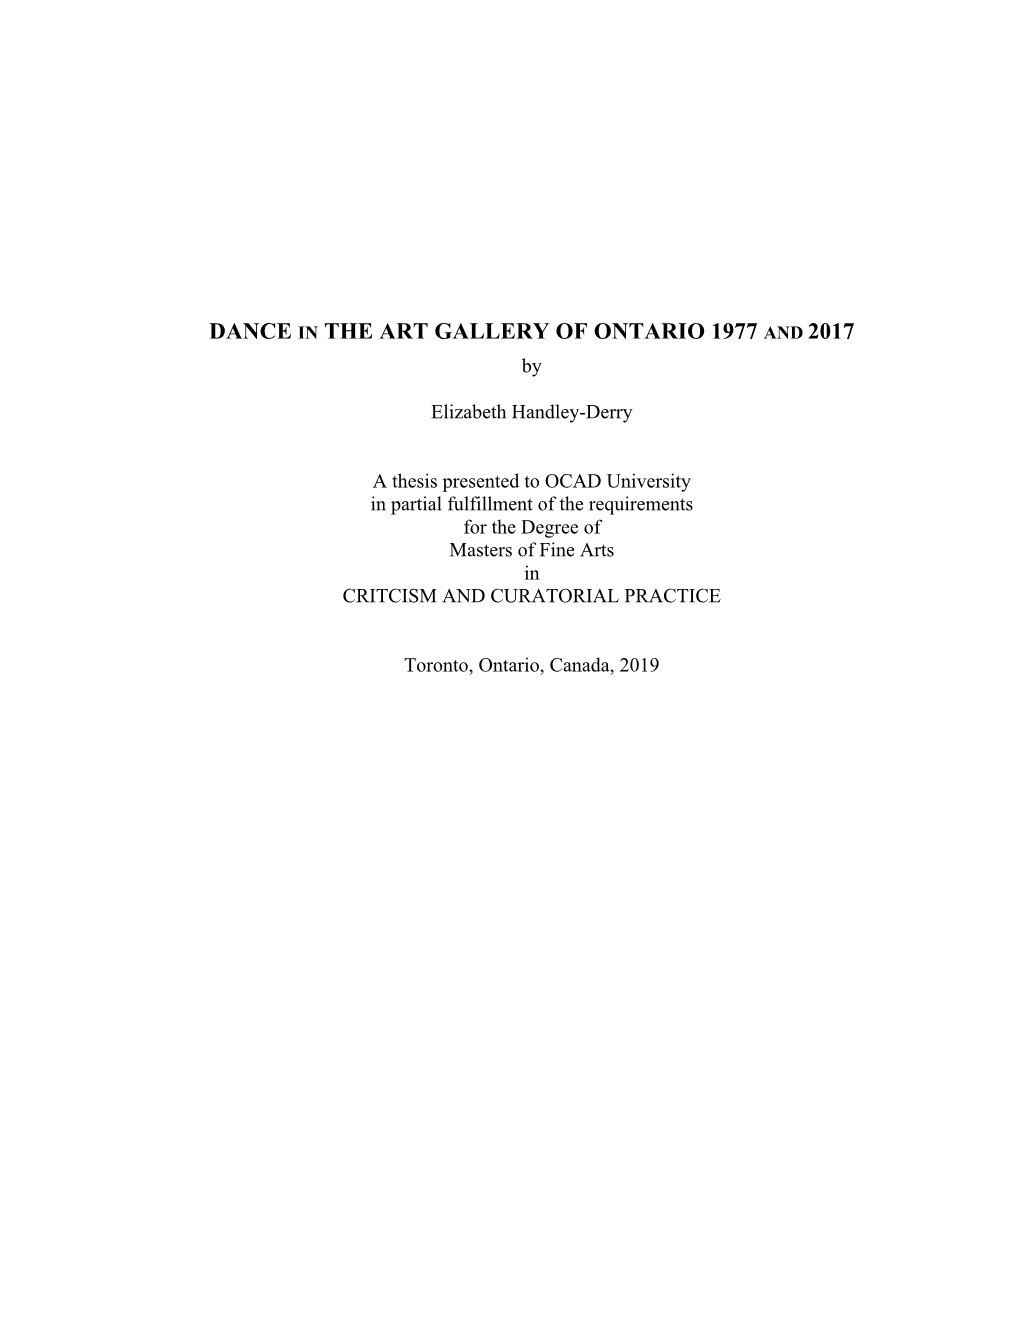 DANCE in the ART GALLERY of ONTARIO 1977 and 2017 By